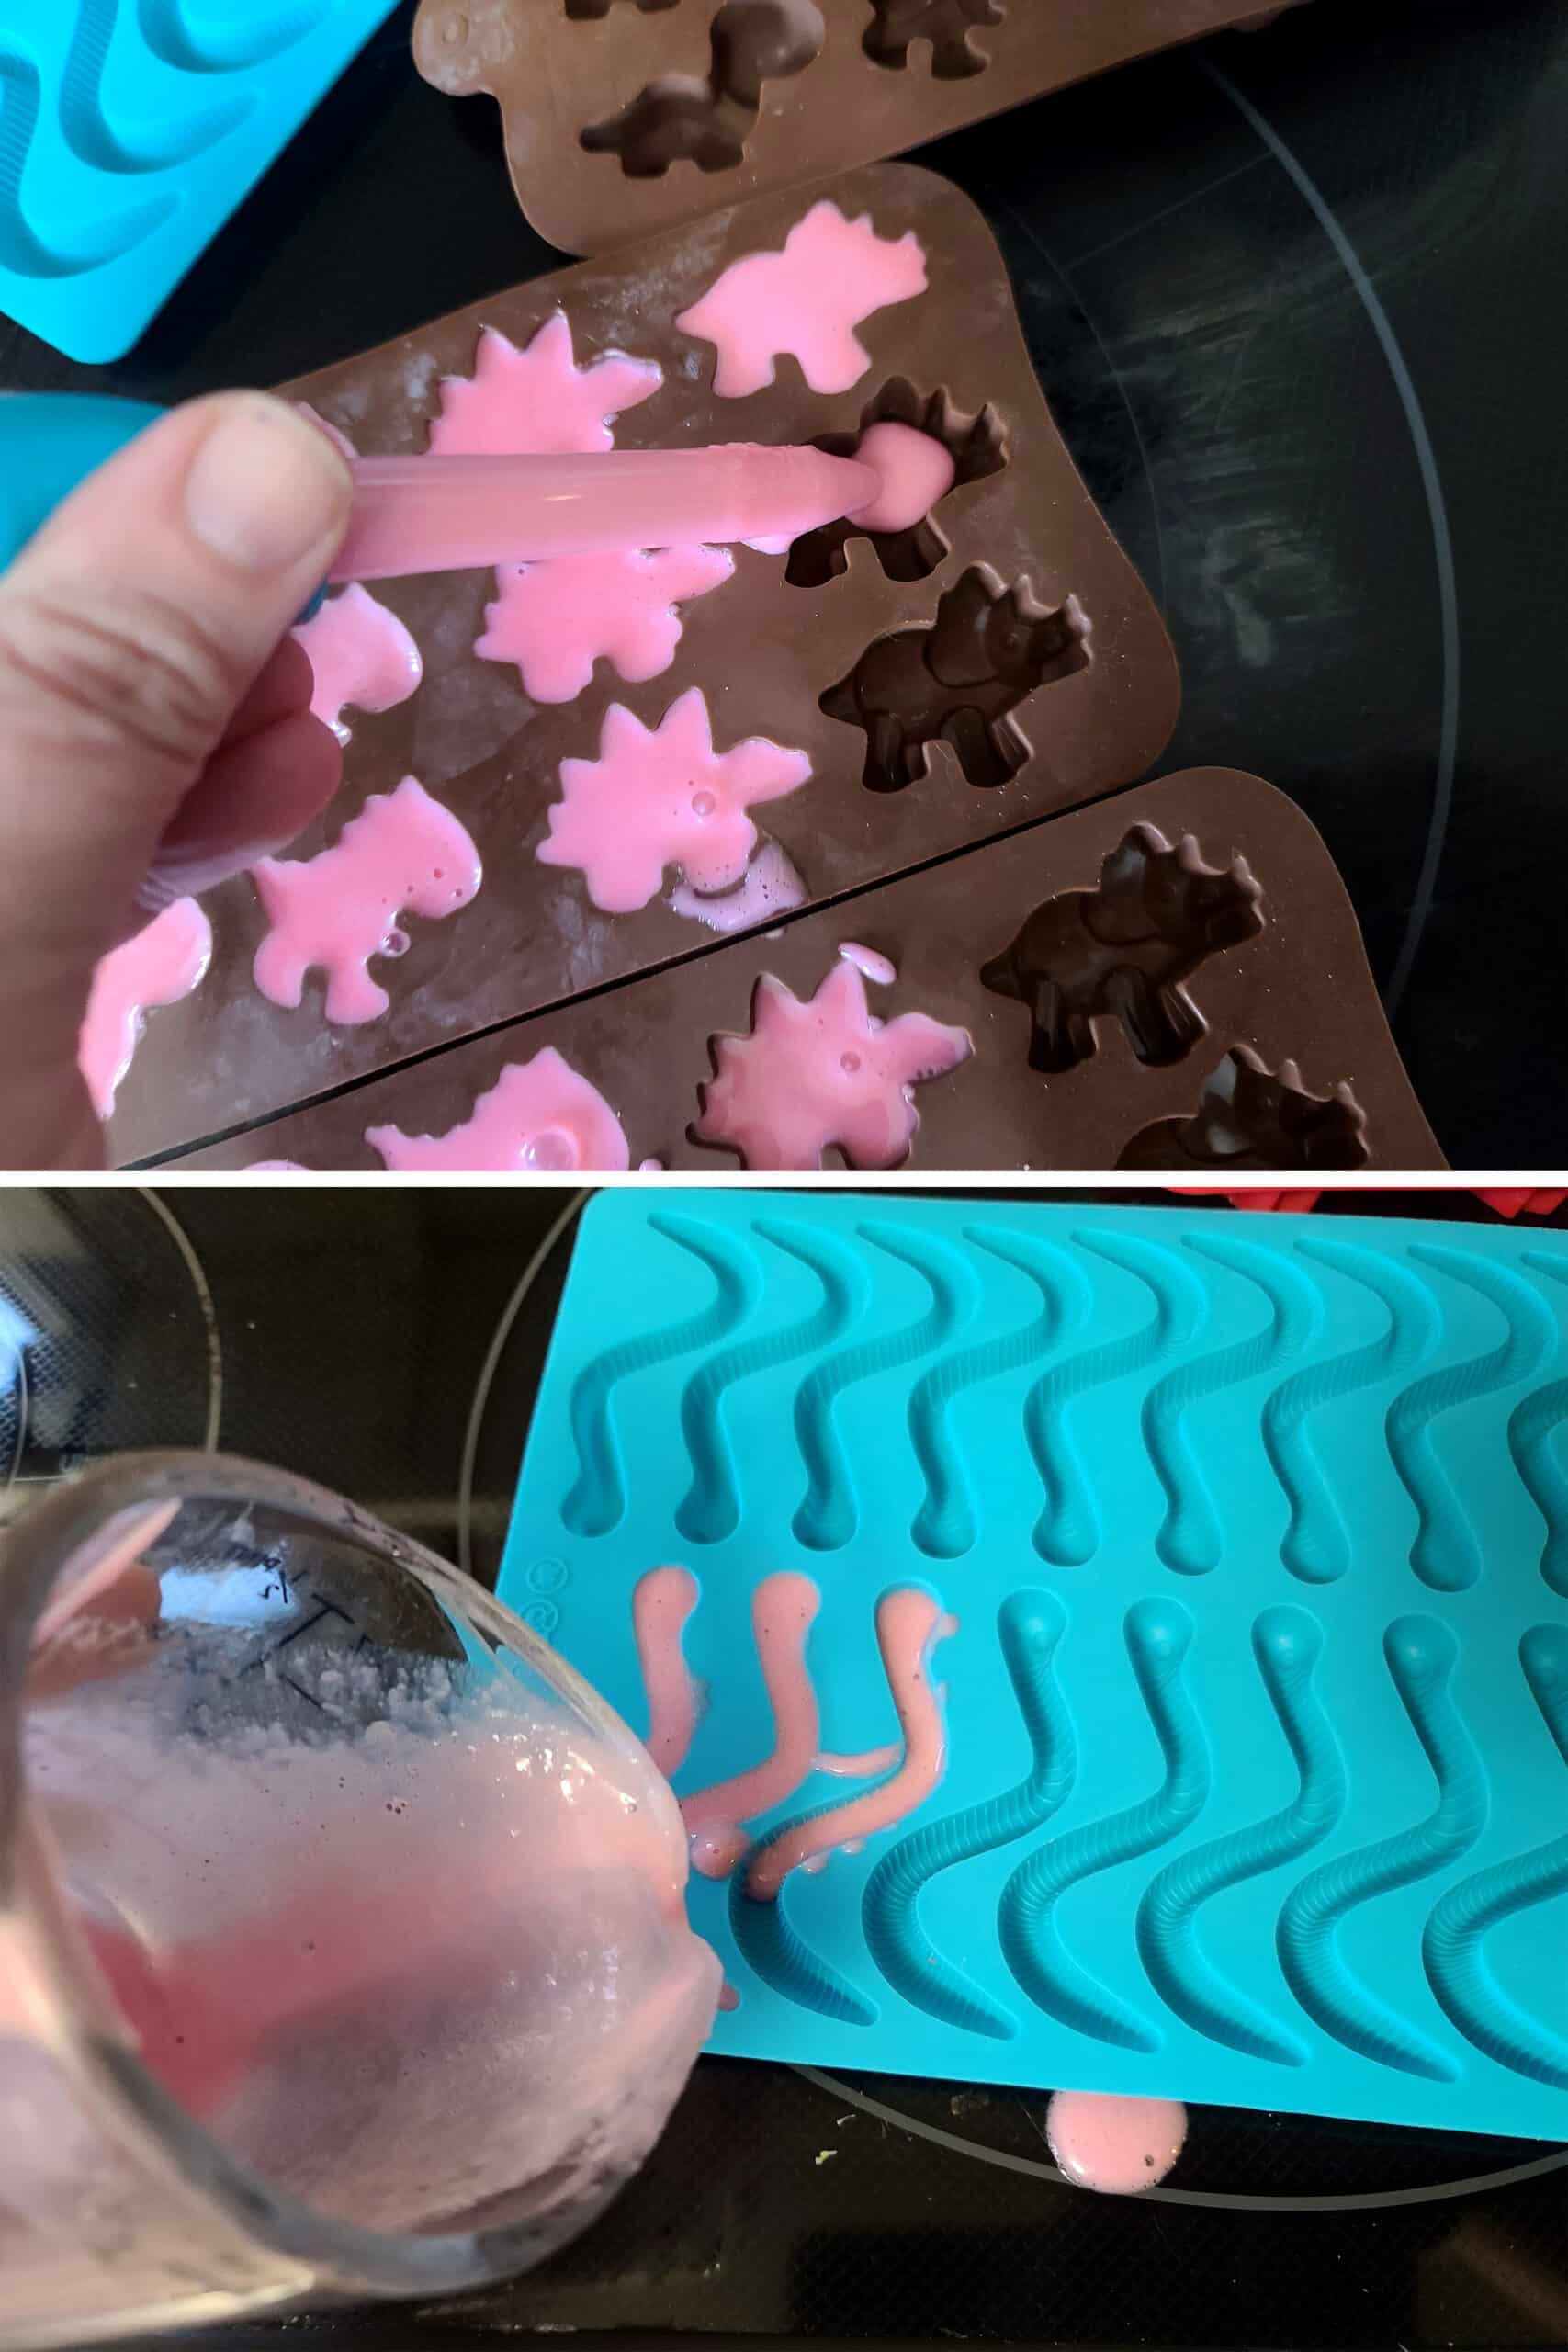 A 2 part image showing the pink gummy candy mixture being poured into gummy candy molds and also dropped in with an eye dropper.